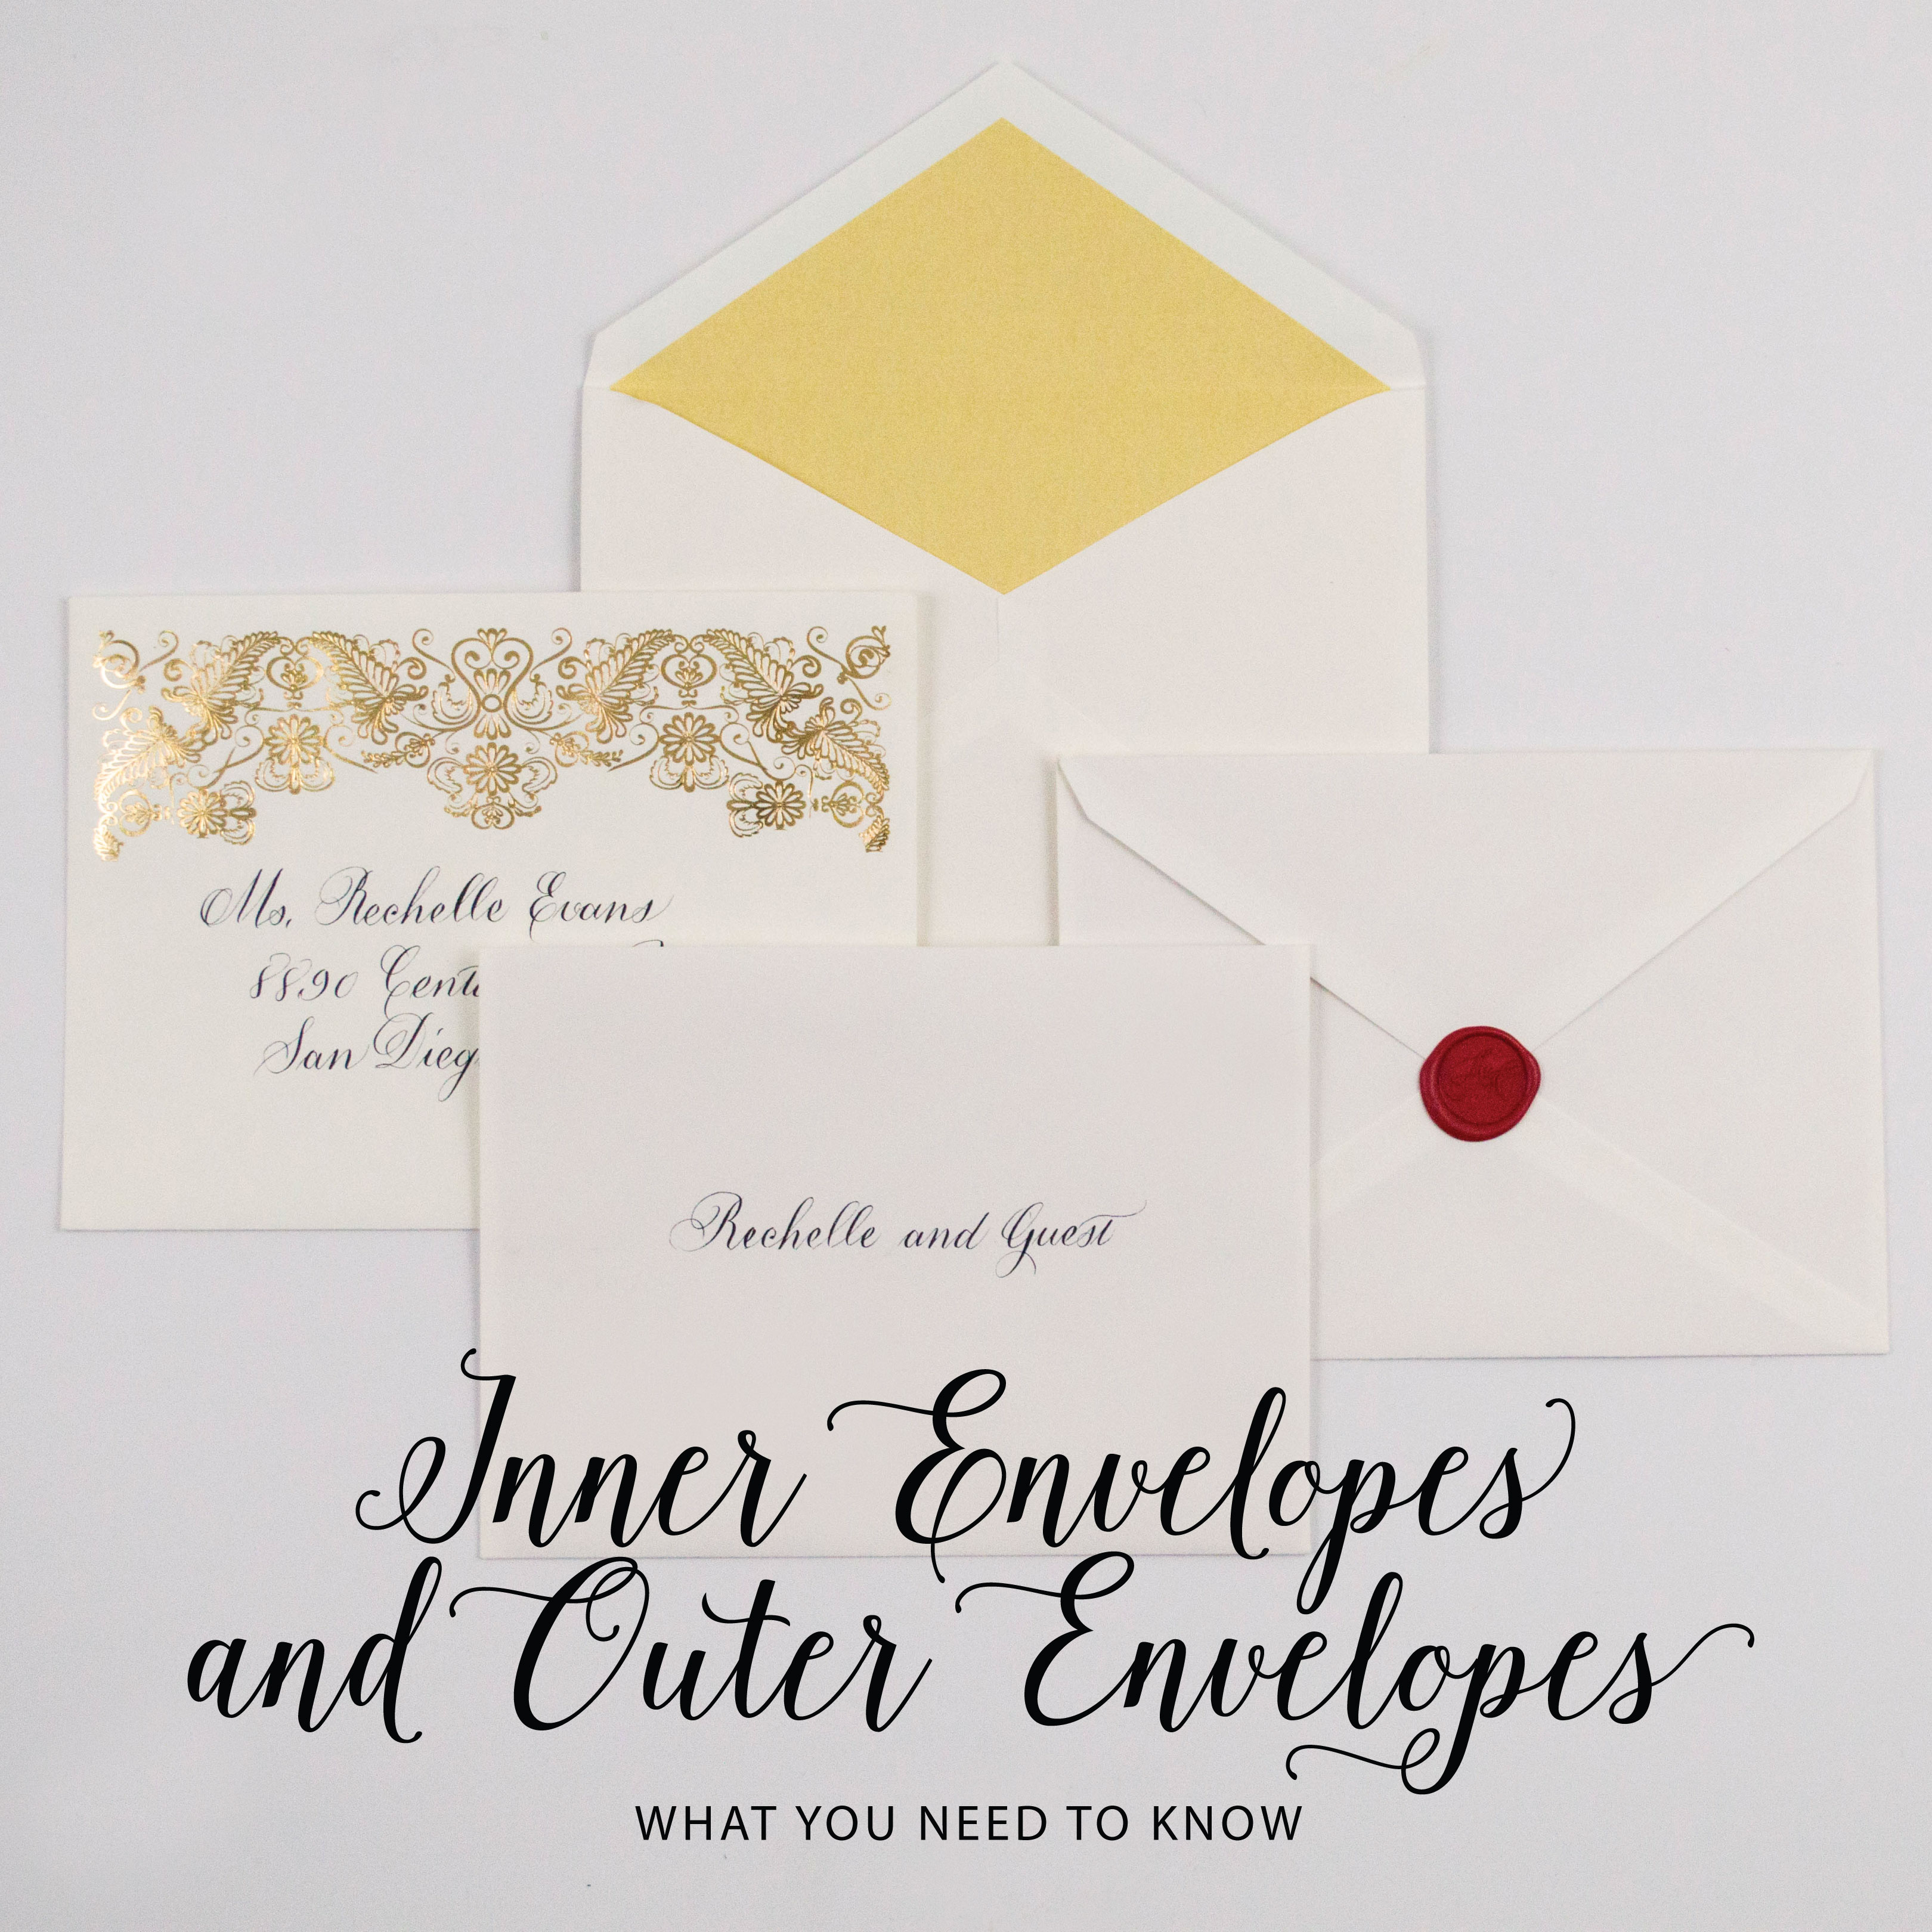 Do You Need Inner and Outer Envelopes for Wedding Invites